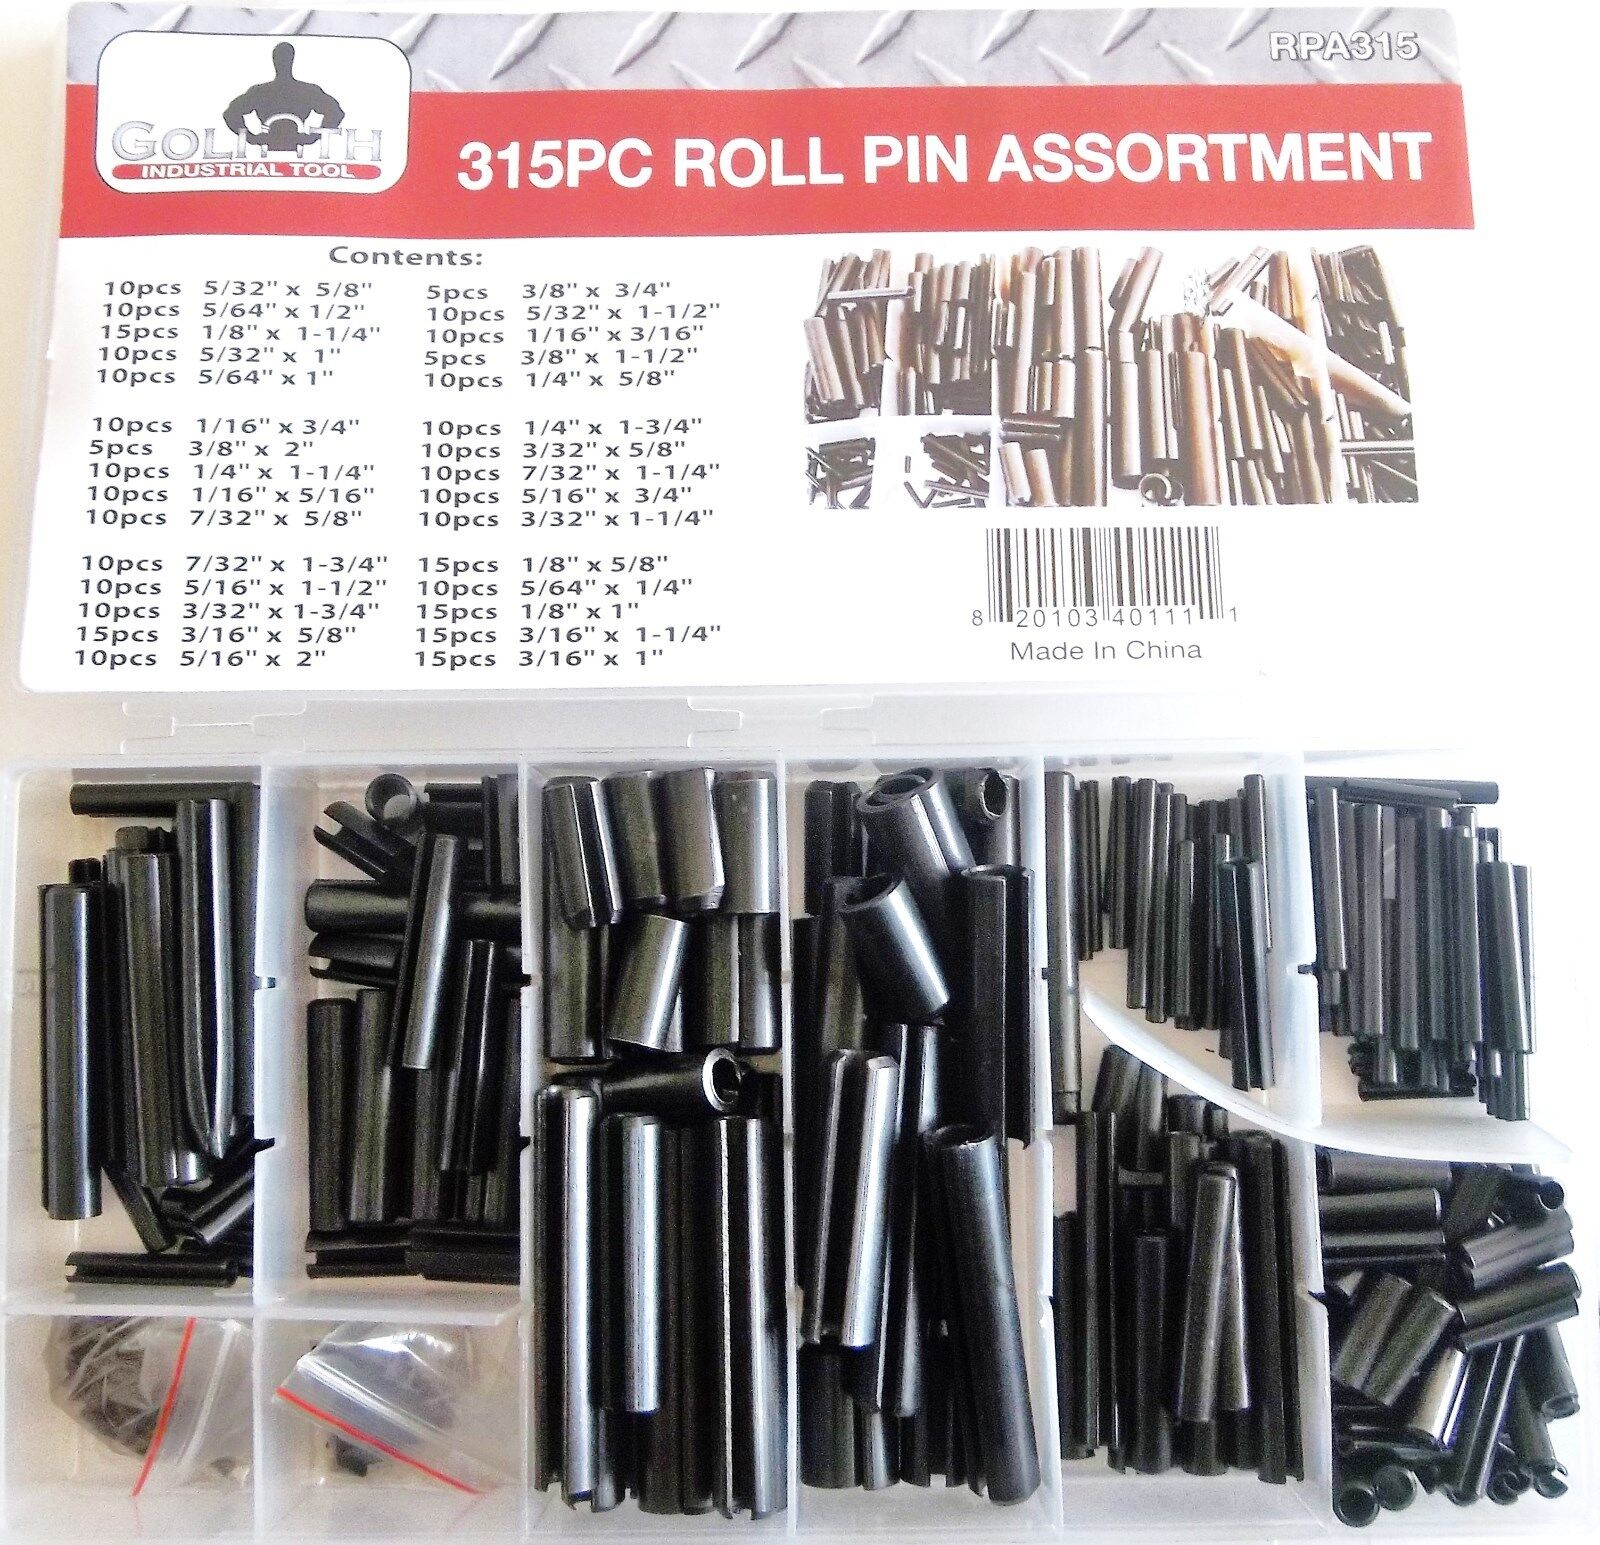 315pc GOLIATH INDUSTRIAL ROLL PIN ASSORTMENT SET 30 DIFFERENT SIZES RPA315 